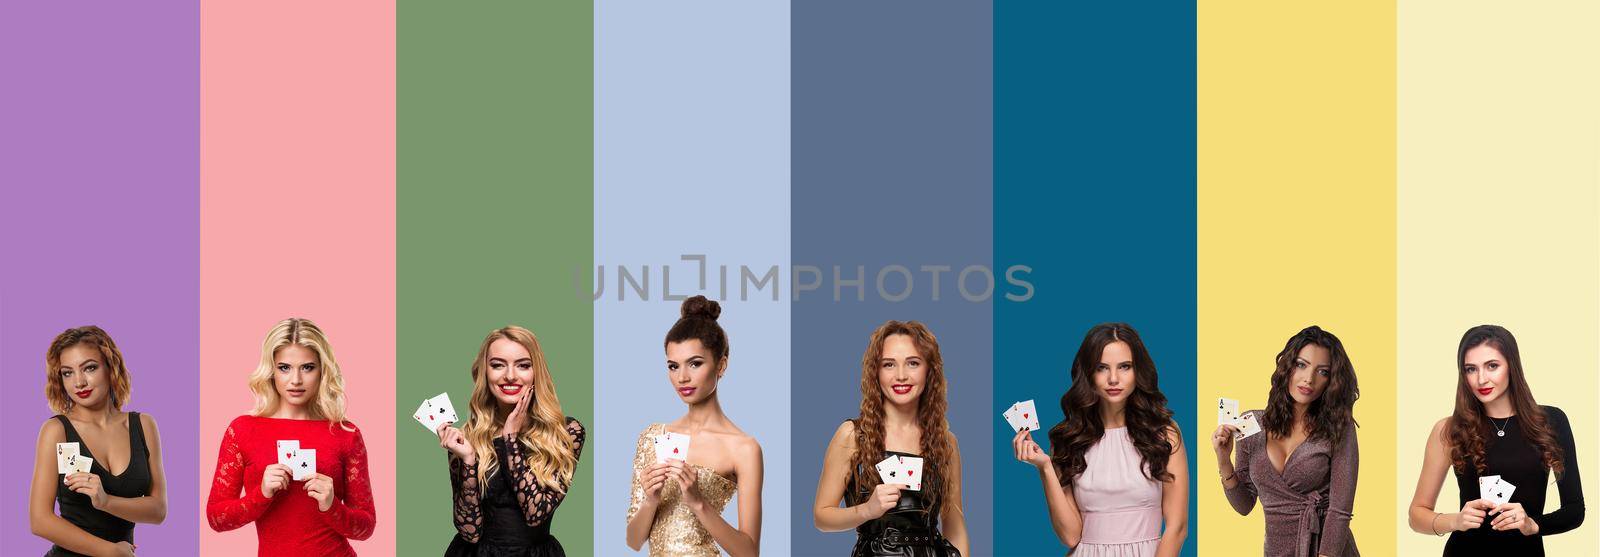 Collage of gorgeous ladies with bright make-up and stylish hairstyles, in luxury dresses and jewelry. They smiling and showing aces while posing against colorful backgrounds. Gambling, poker, casino